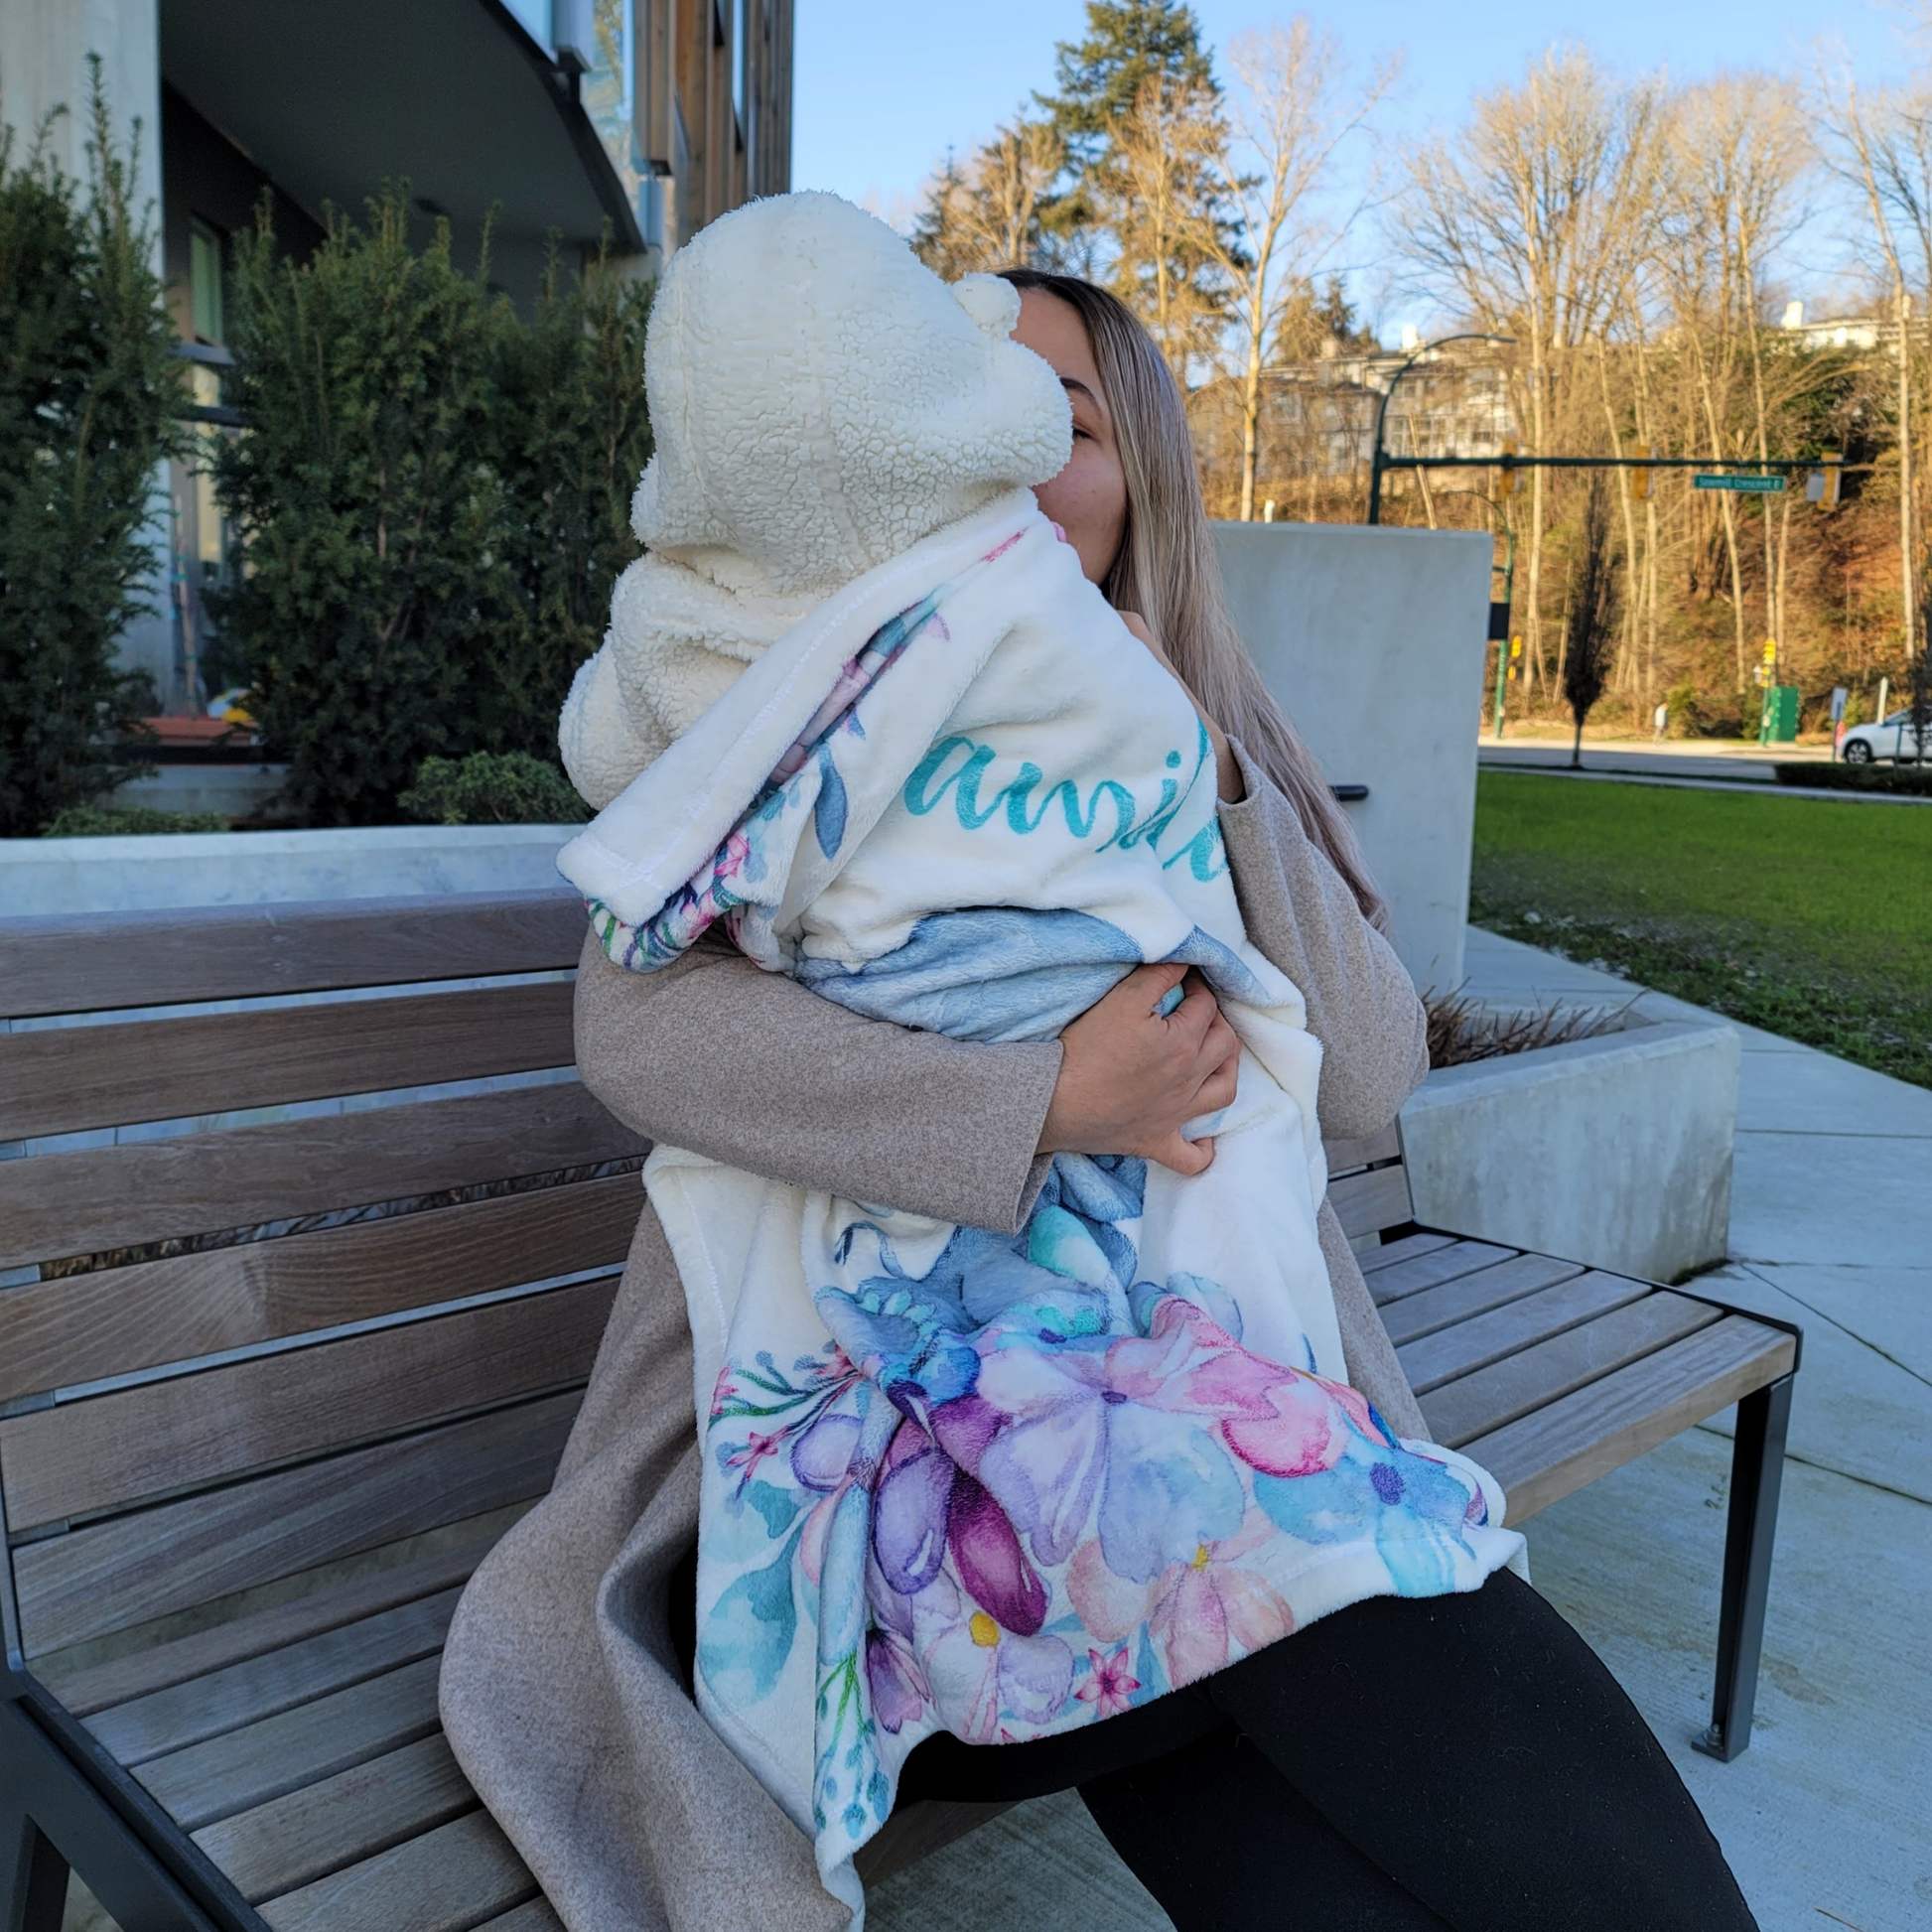 Mom holding baby with personalized blanket to keep the baby warm - hunny bubba kids